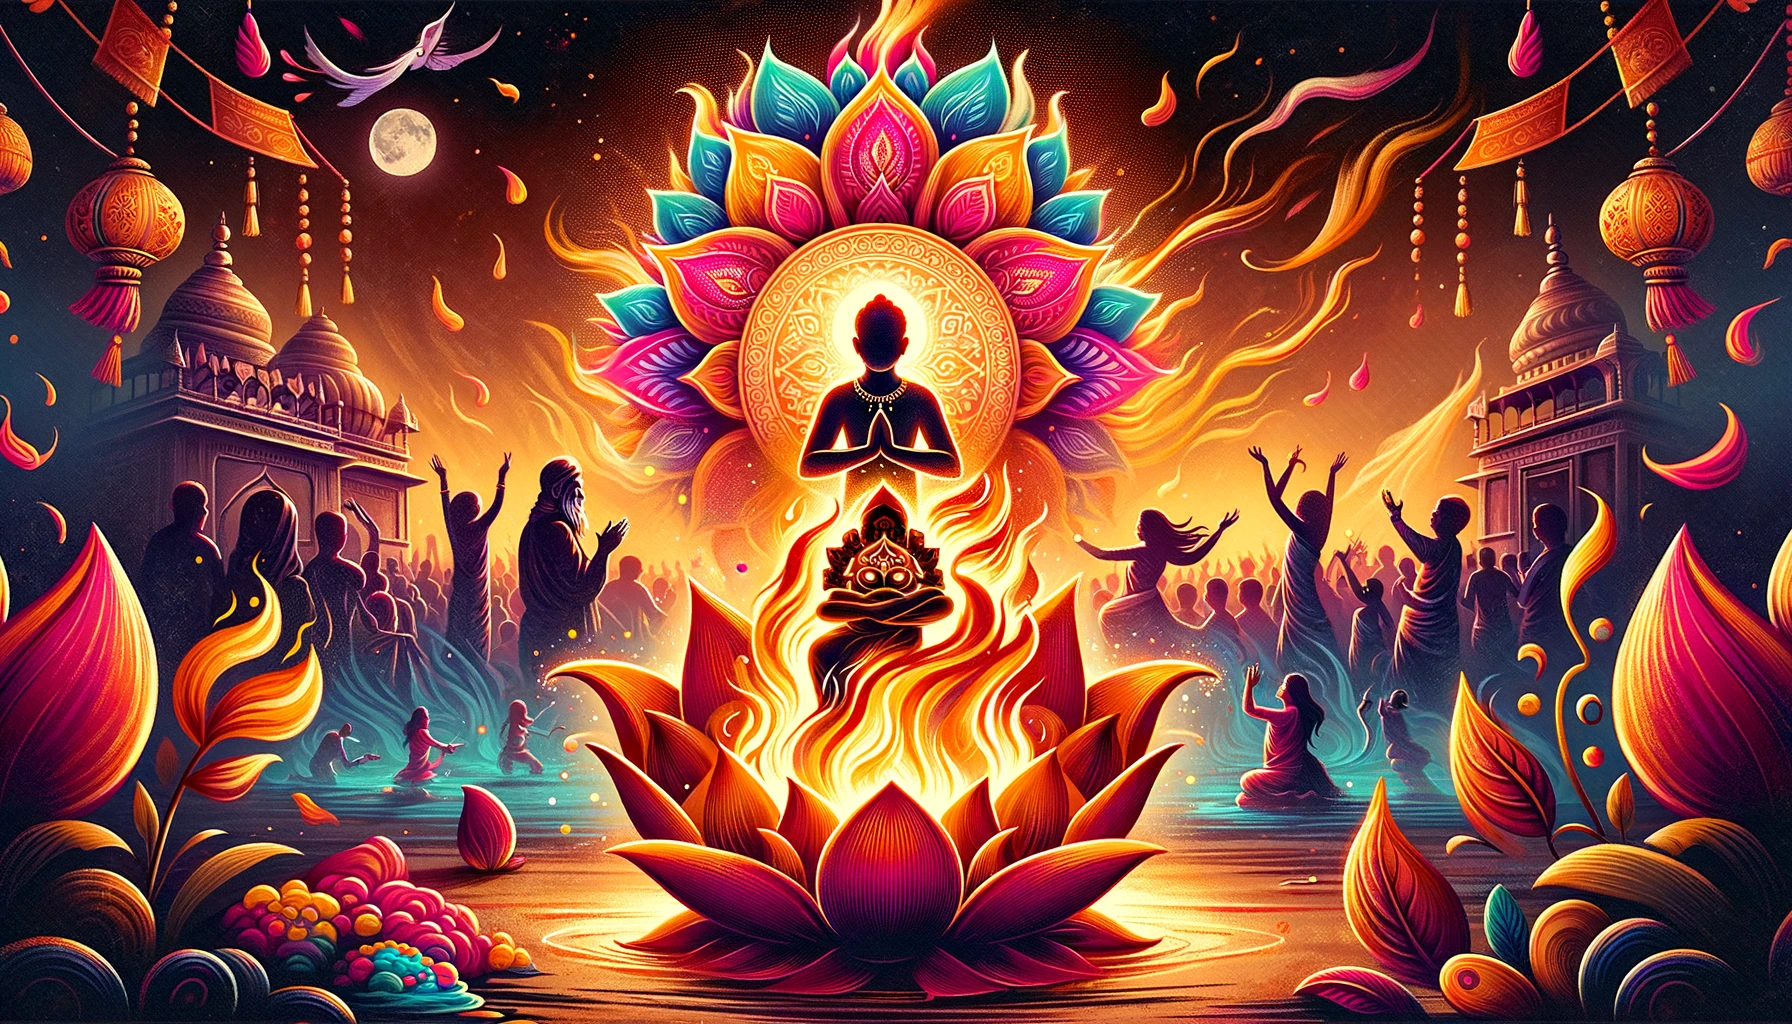 A vibrant blog header illustration depicting the Holi festival's legend of Prahlad and Holika, featuring a bonfire for Holika Dahan and a symbolic figure of Prahlad in prayer, represented by a lotus, set against a backdrop of colorful Holi celebrations.